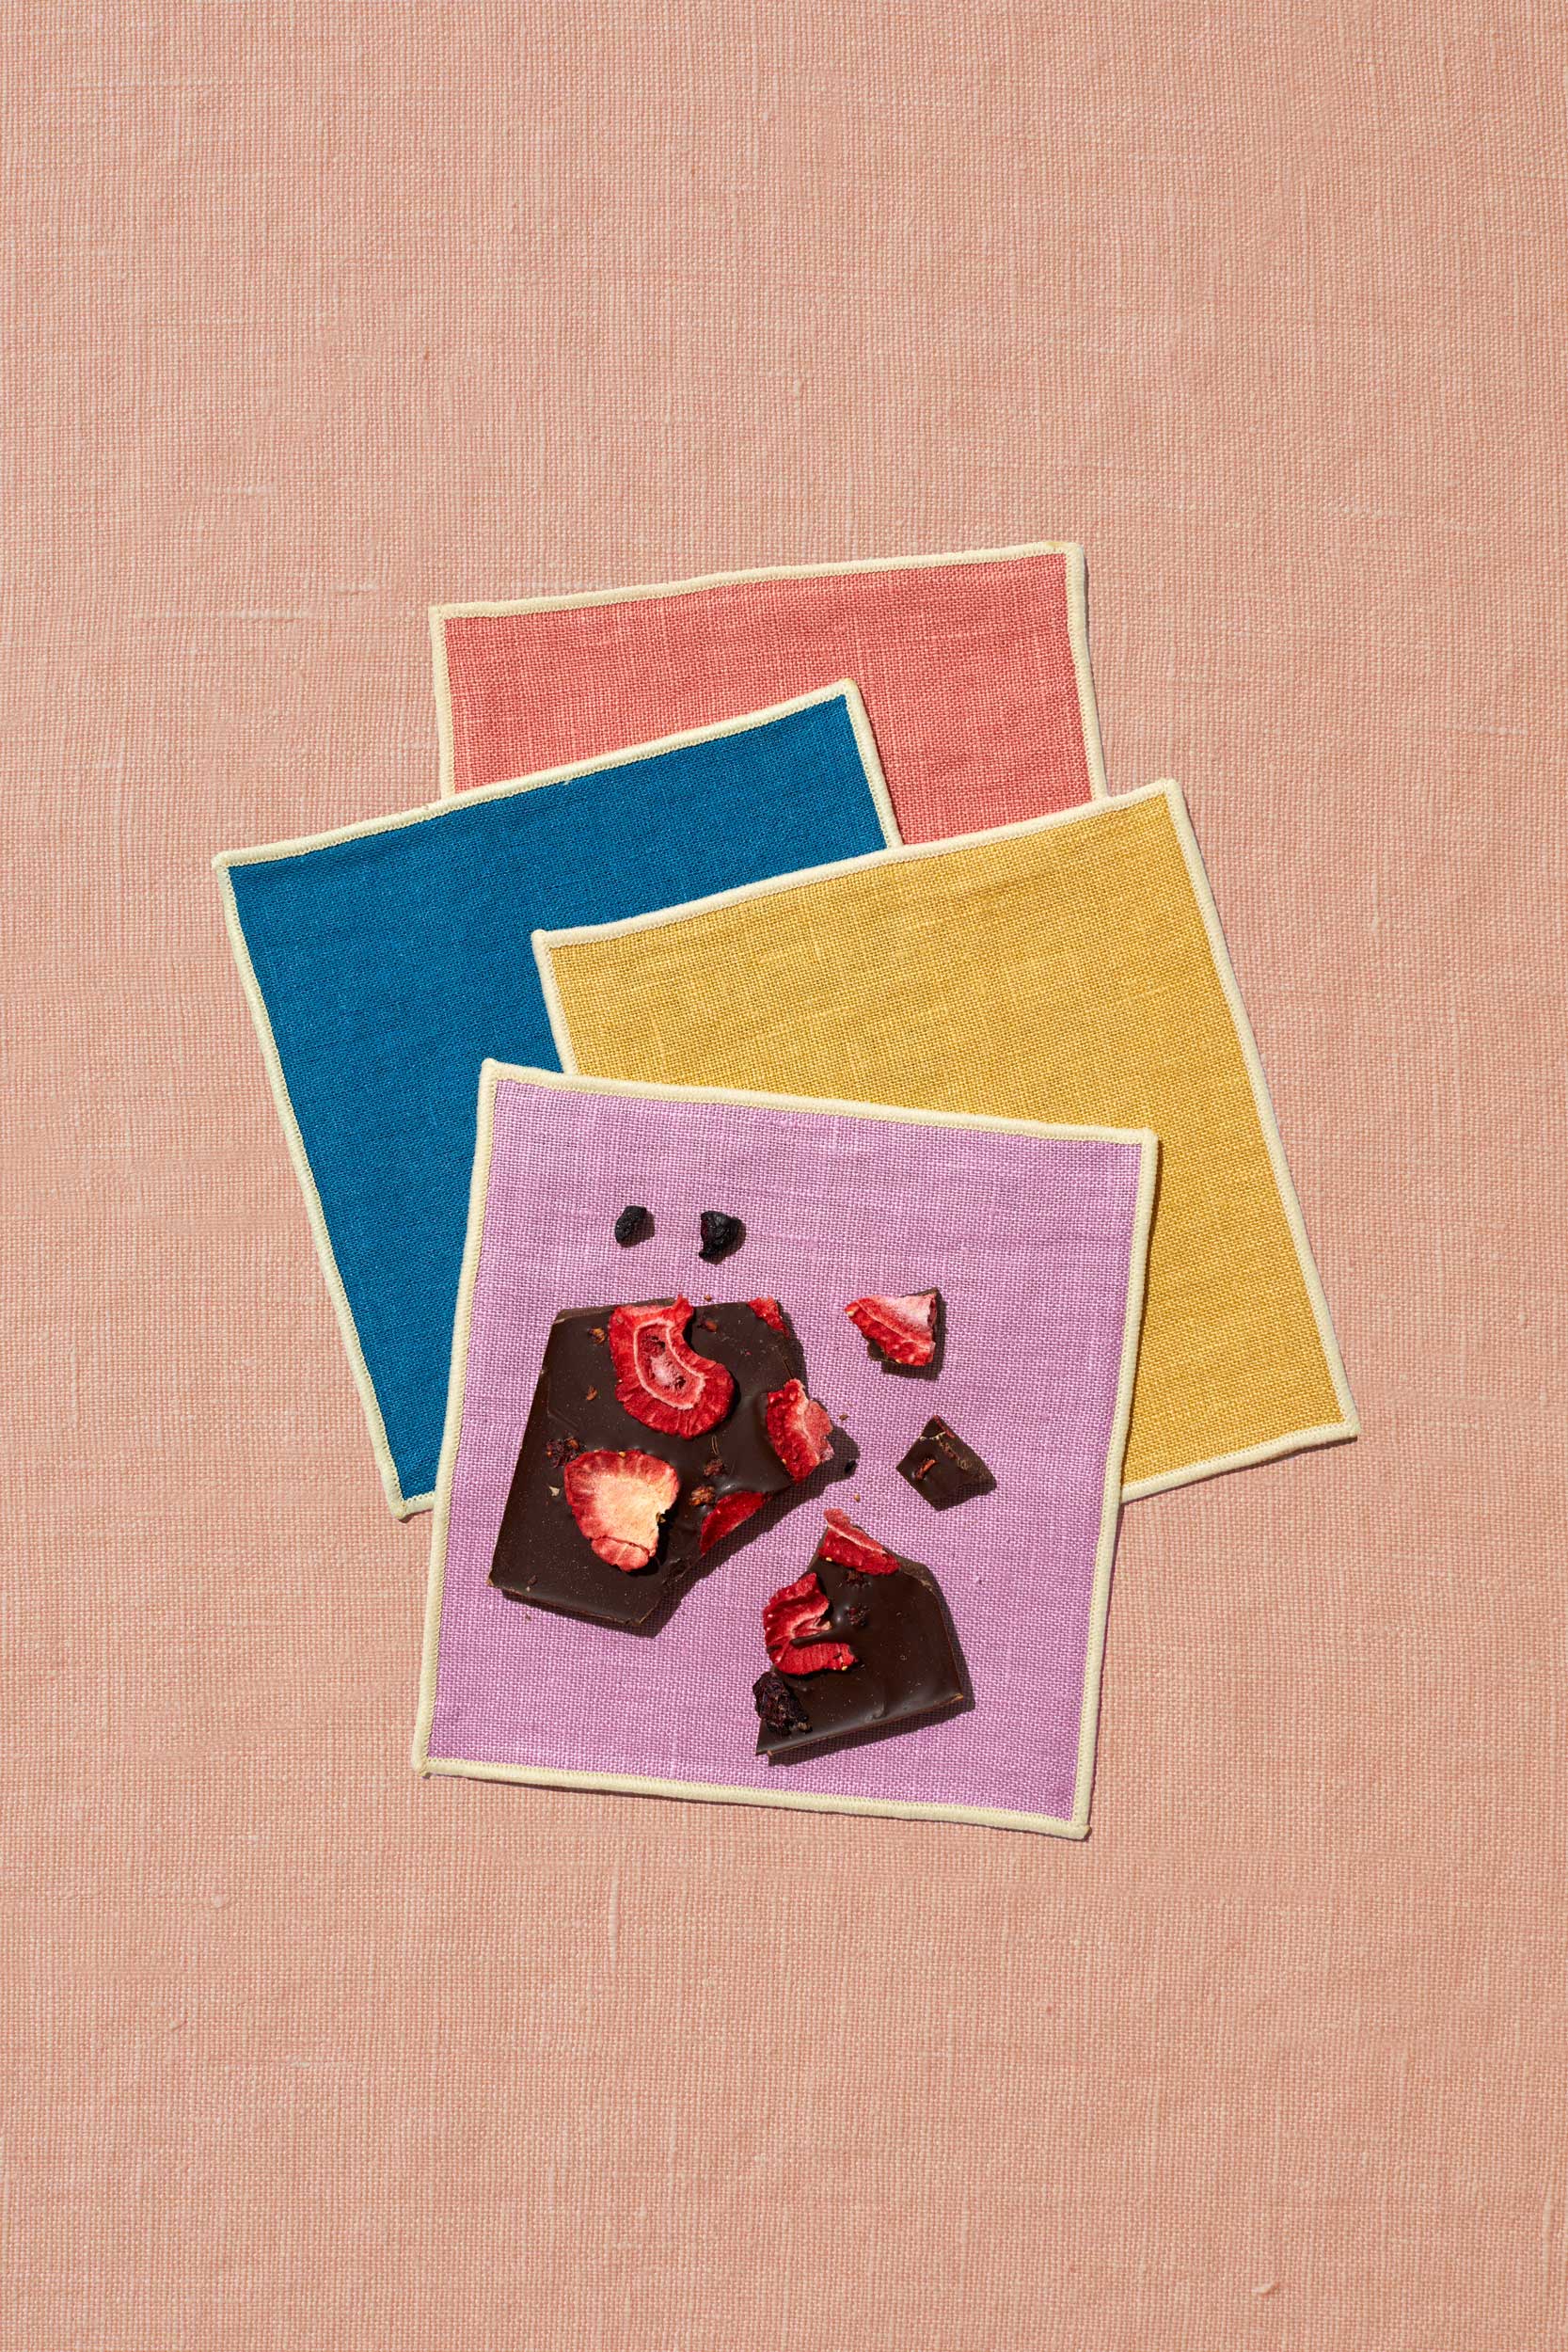 A set of four napkins sits upon a peach linen background. The napkins are artfully scattered and come in four colors with ivory trim: rose, marine blue, mustard, and lavender. On the front napkin, which is lavender, sits a broken bar of date sweetened chocolate topped with mixed berries. The chocolate has no added sugar.